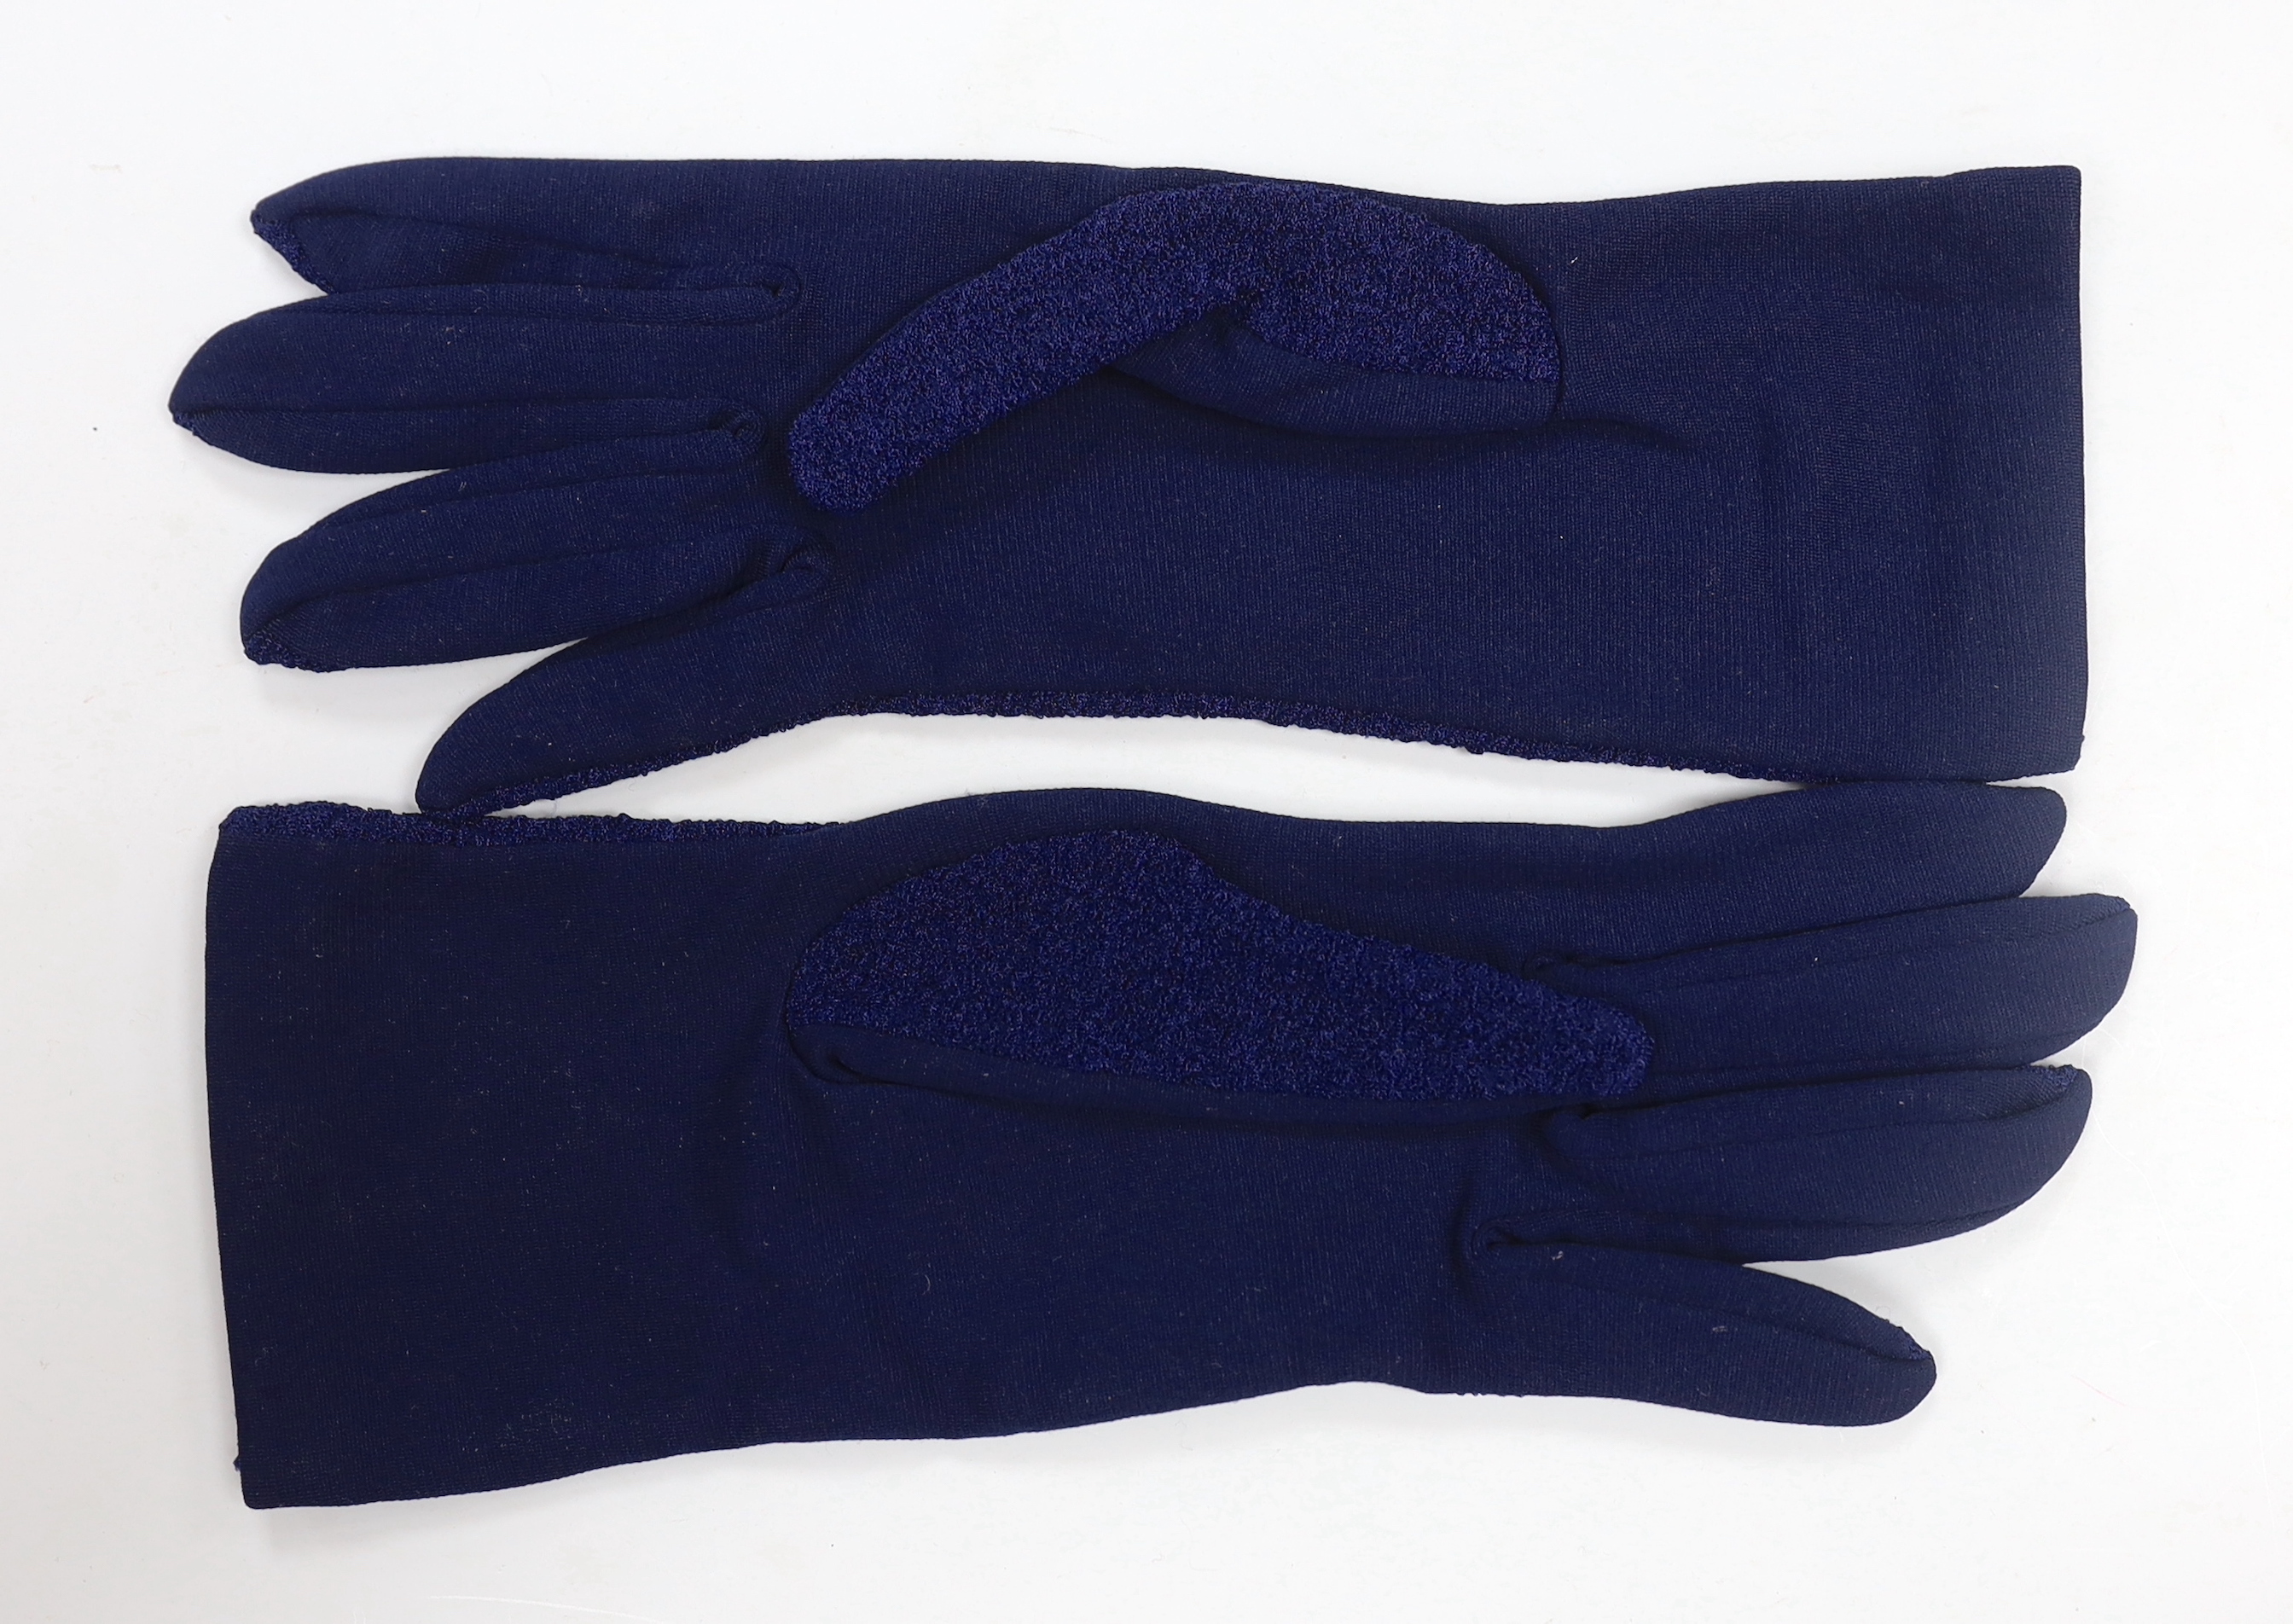 An evening purse, a shawl and pair of blue gloves